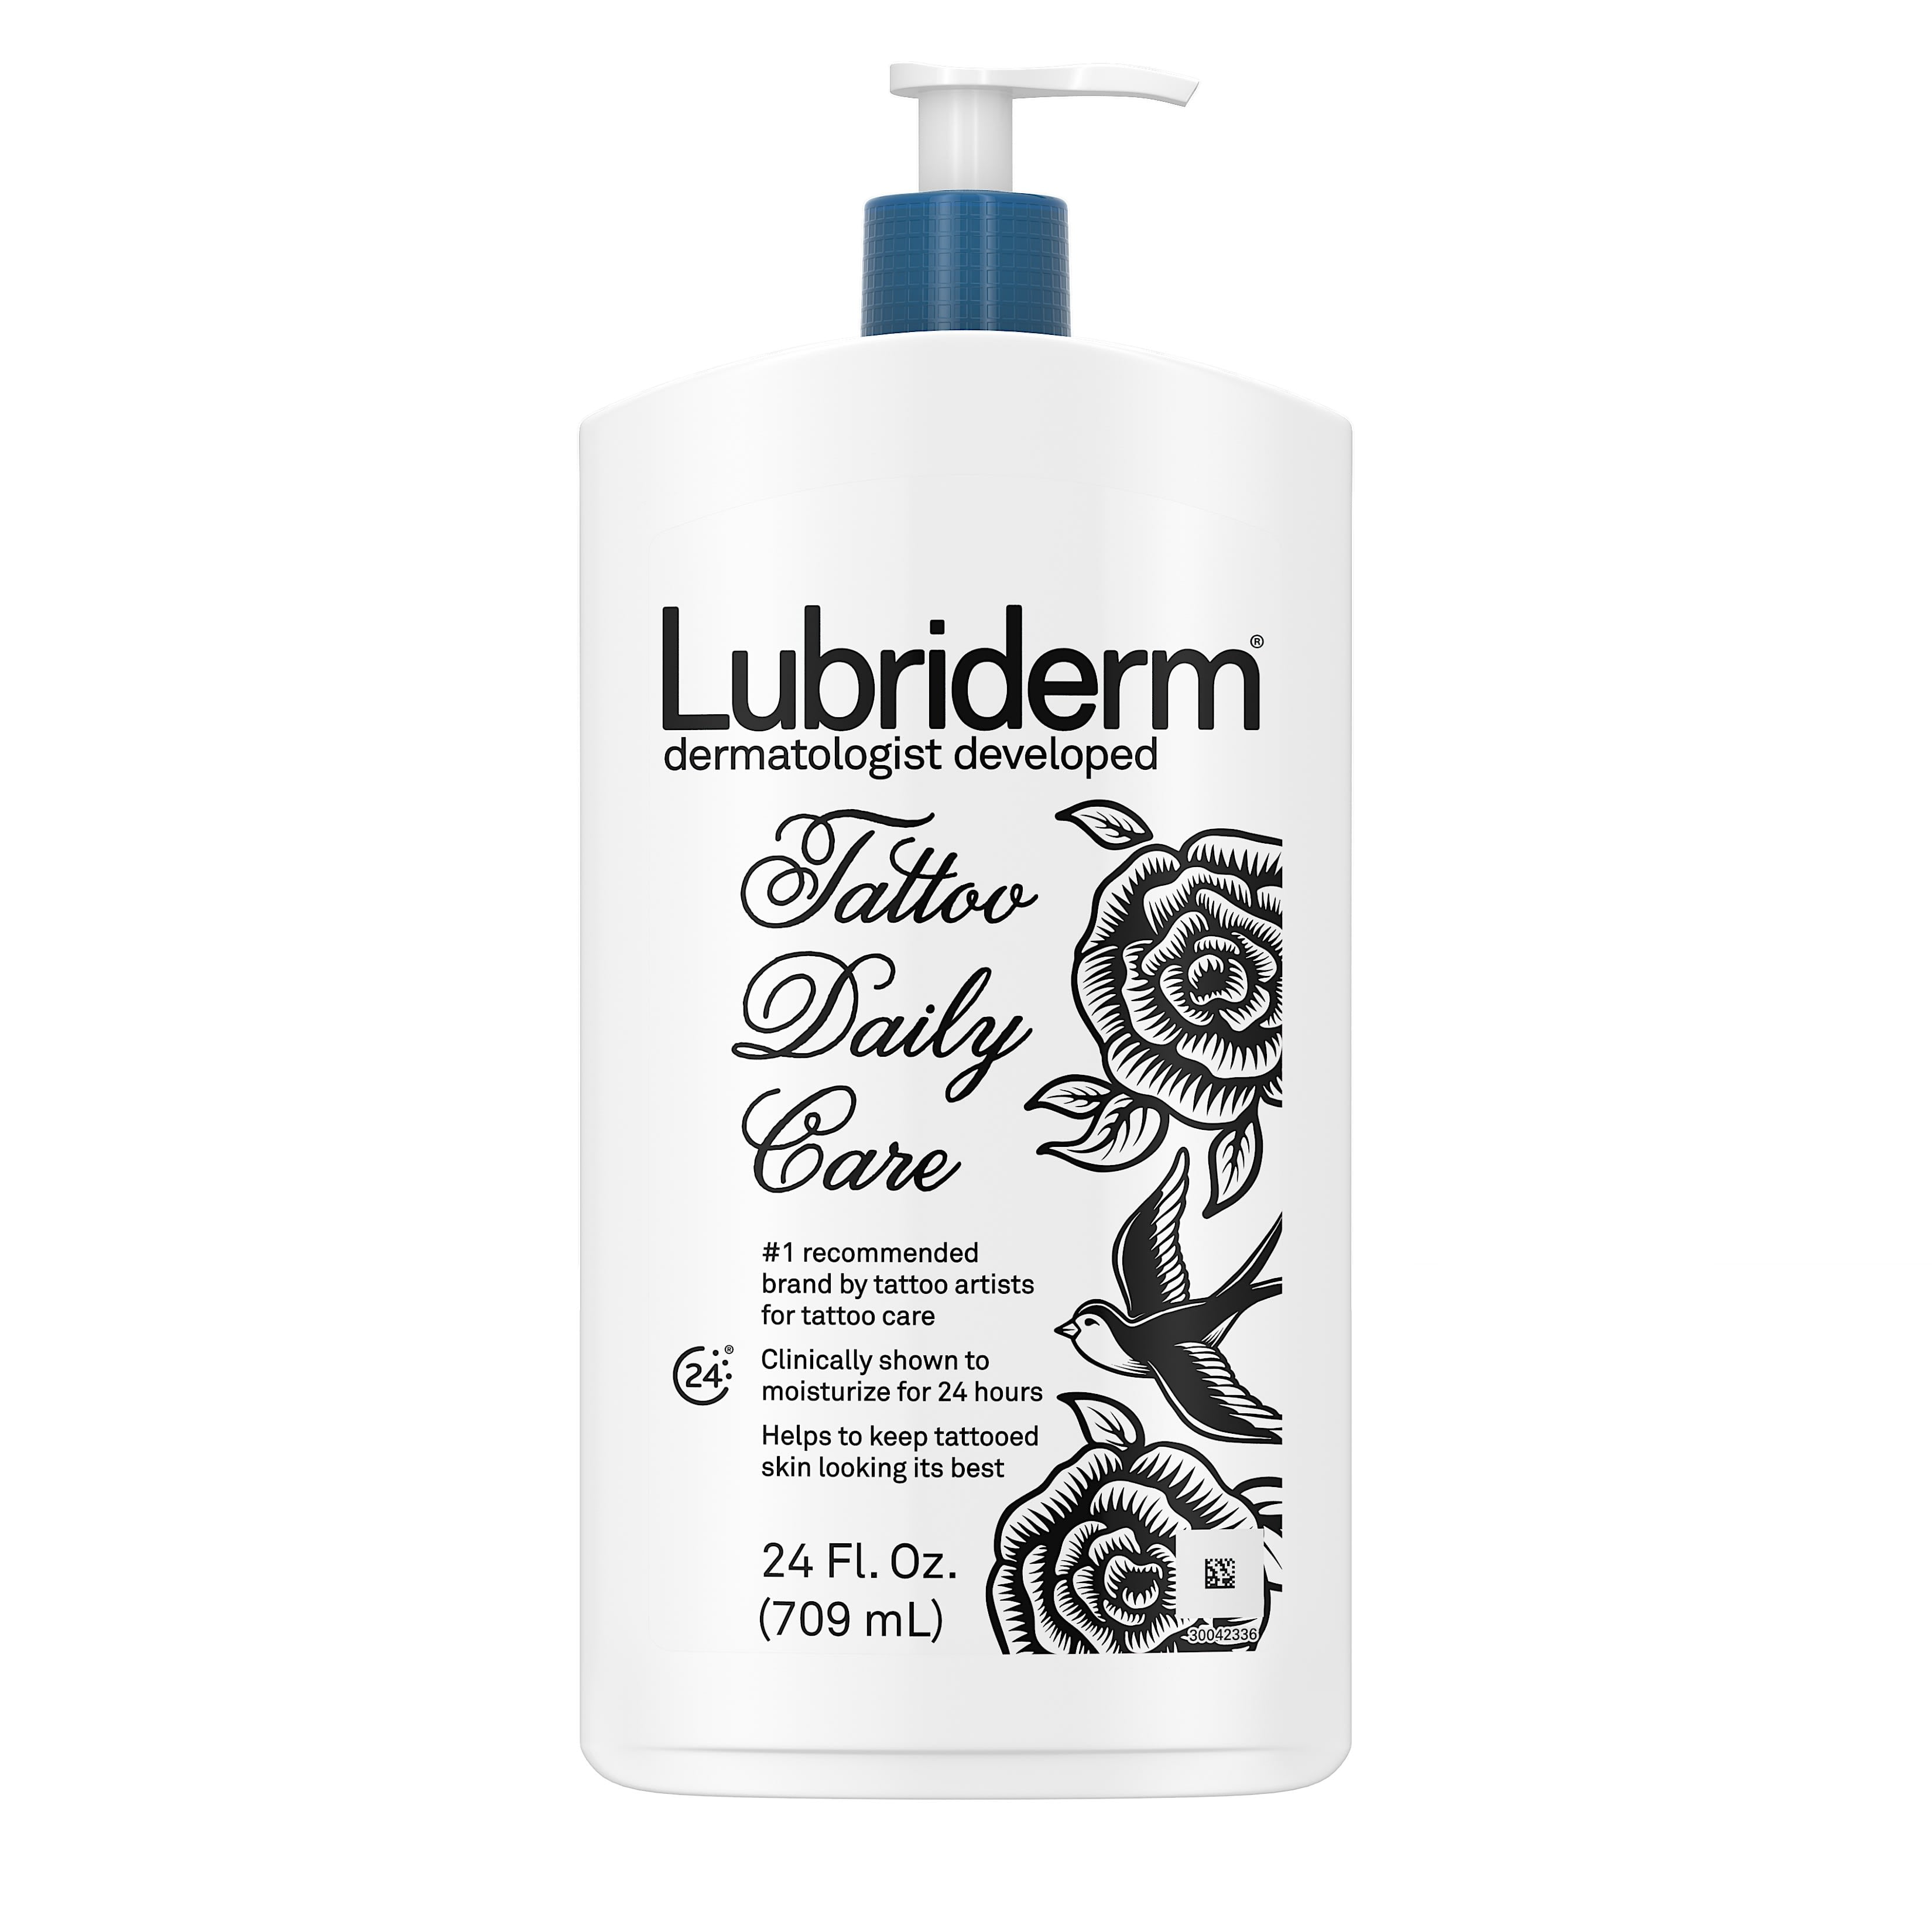 Is lubriderm good for tattoos